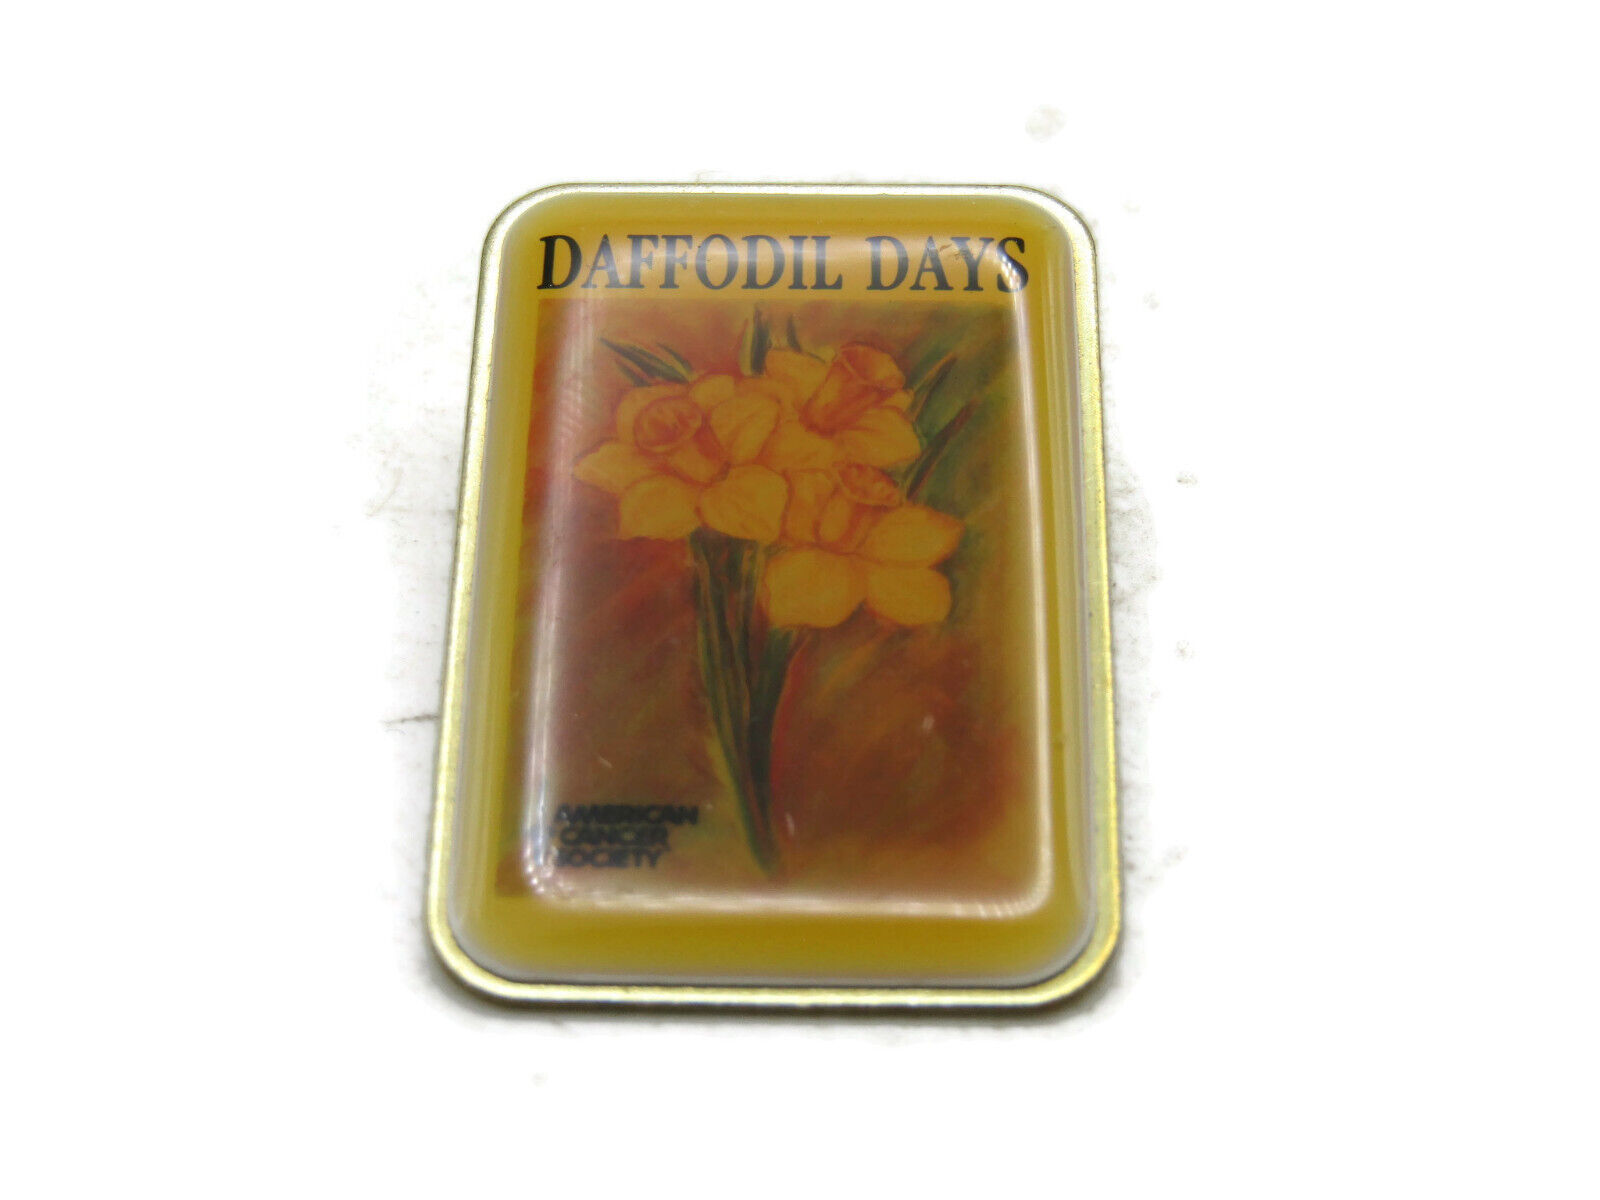 Daffodil Days Lettered Pin Vintage American Cancer Society & Gold Tone